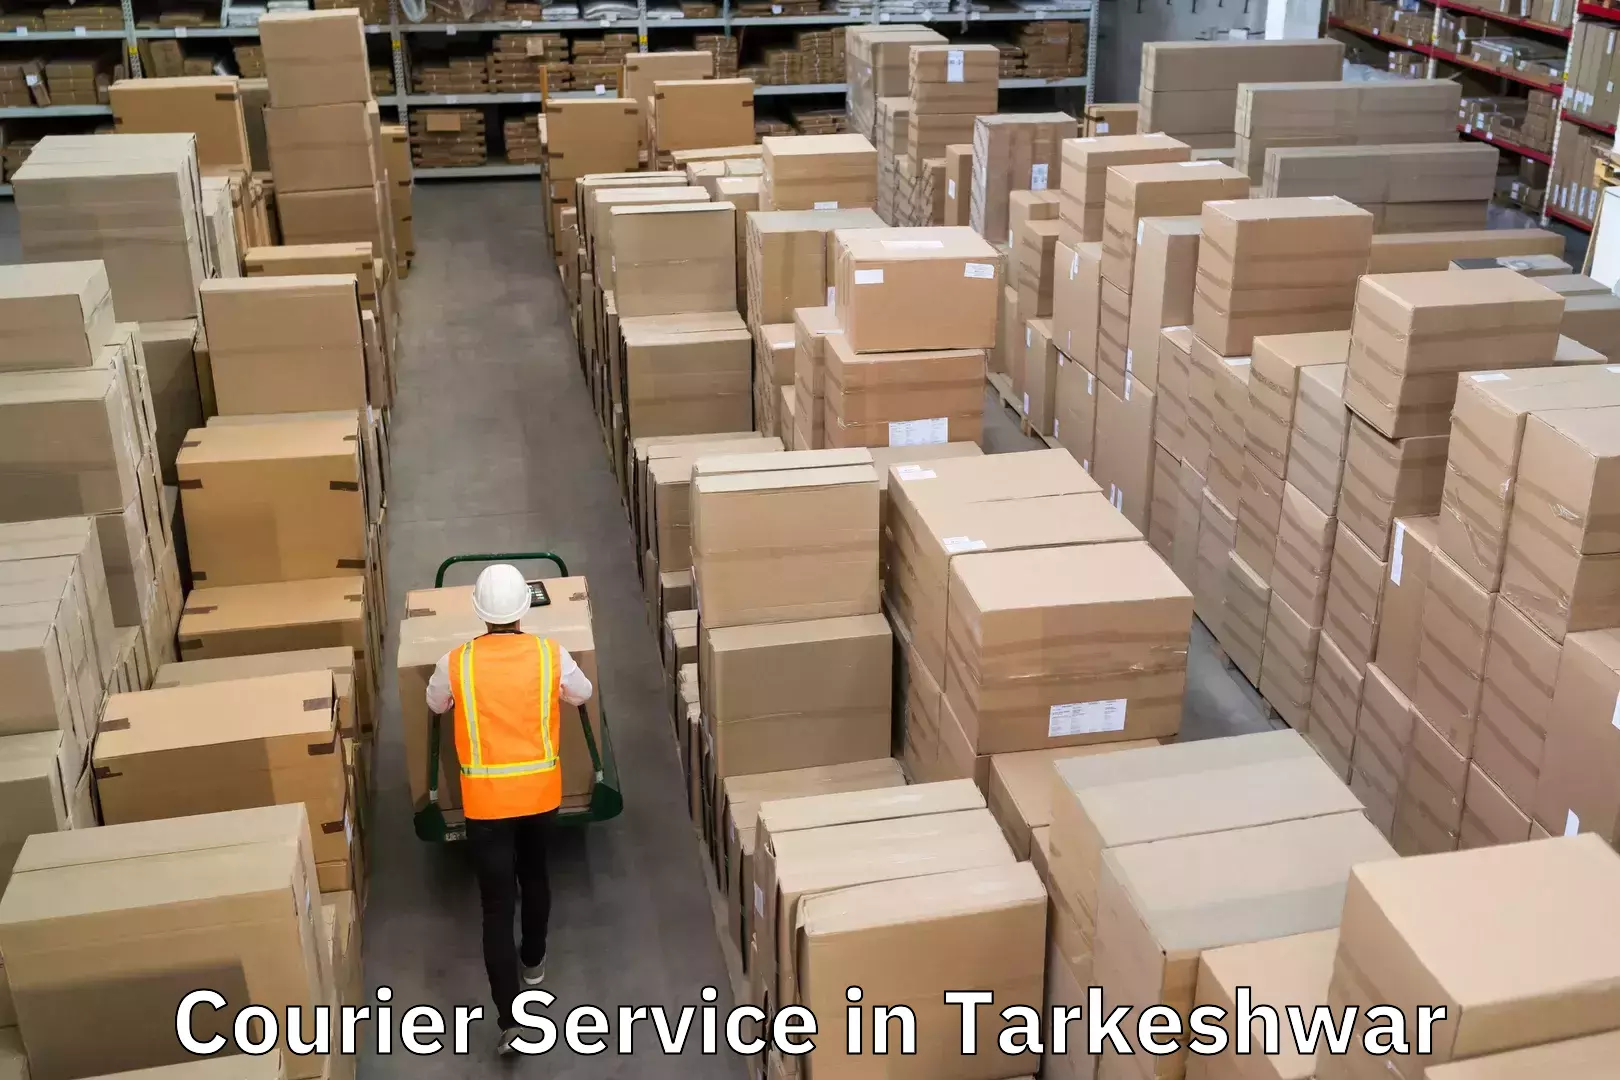 Sustainable courier practices in Tarkeshwar